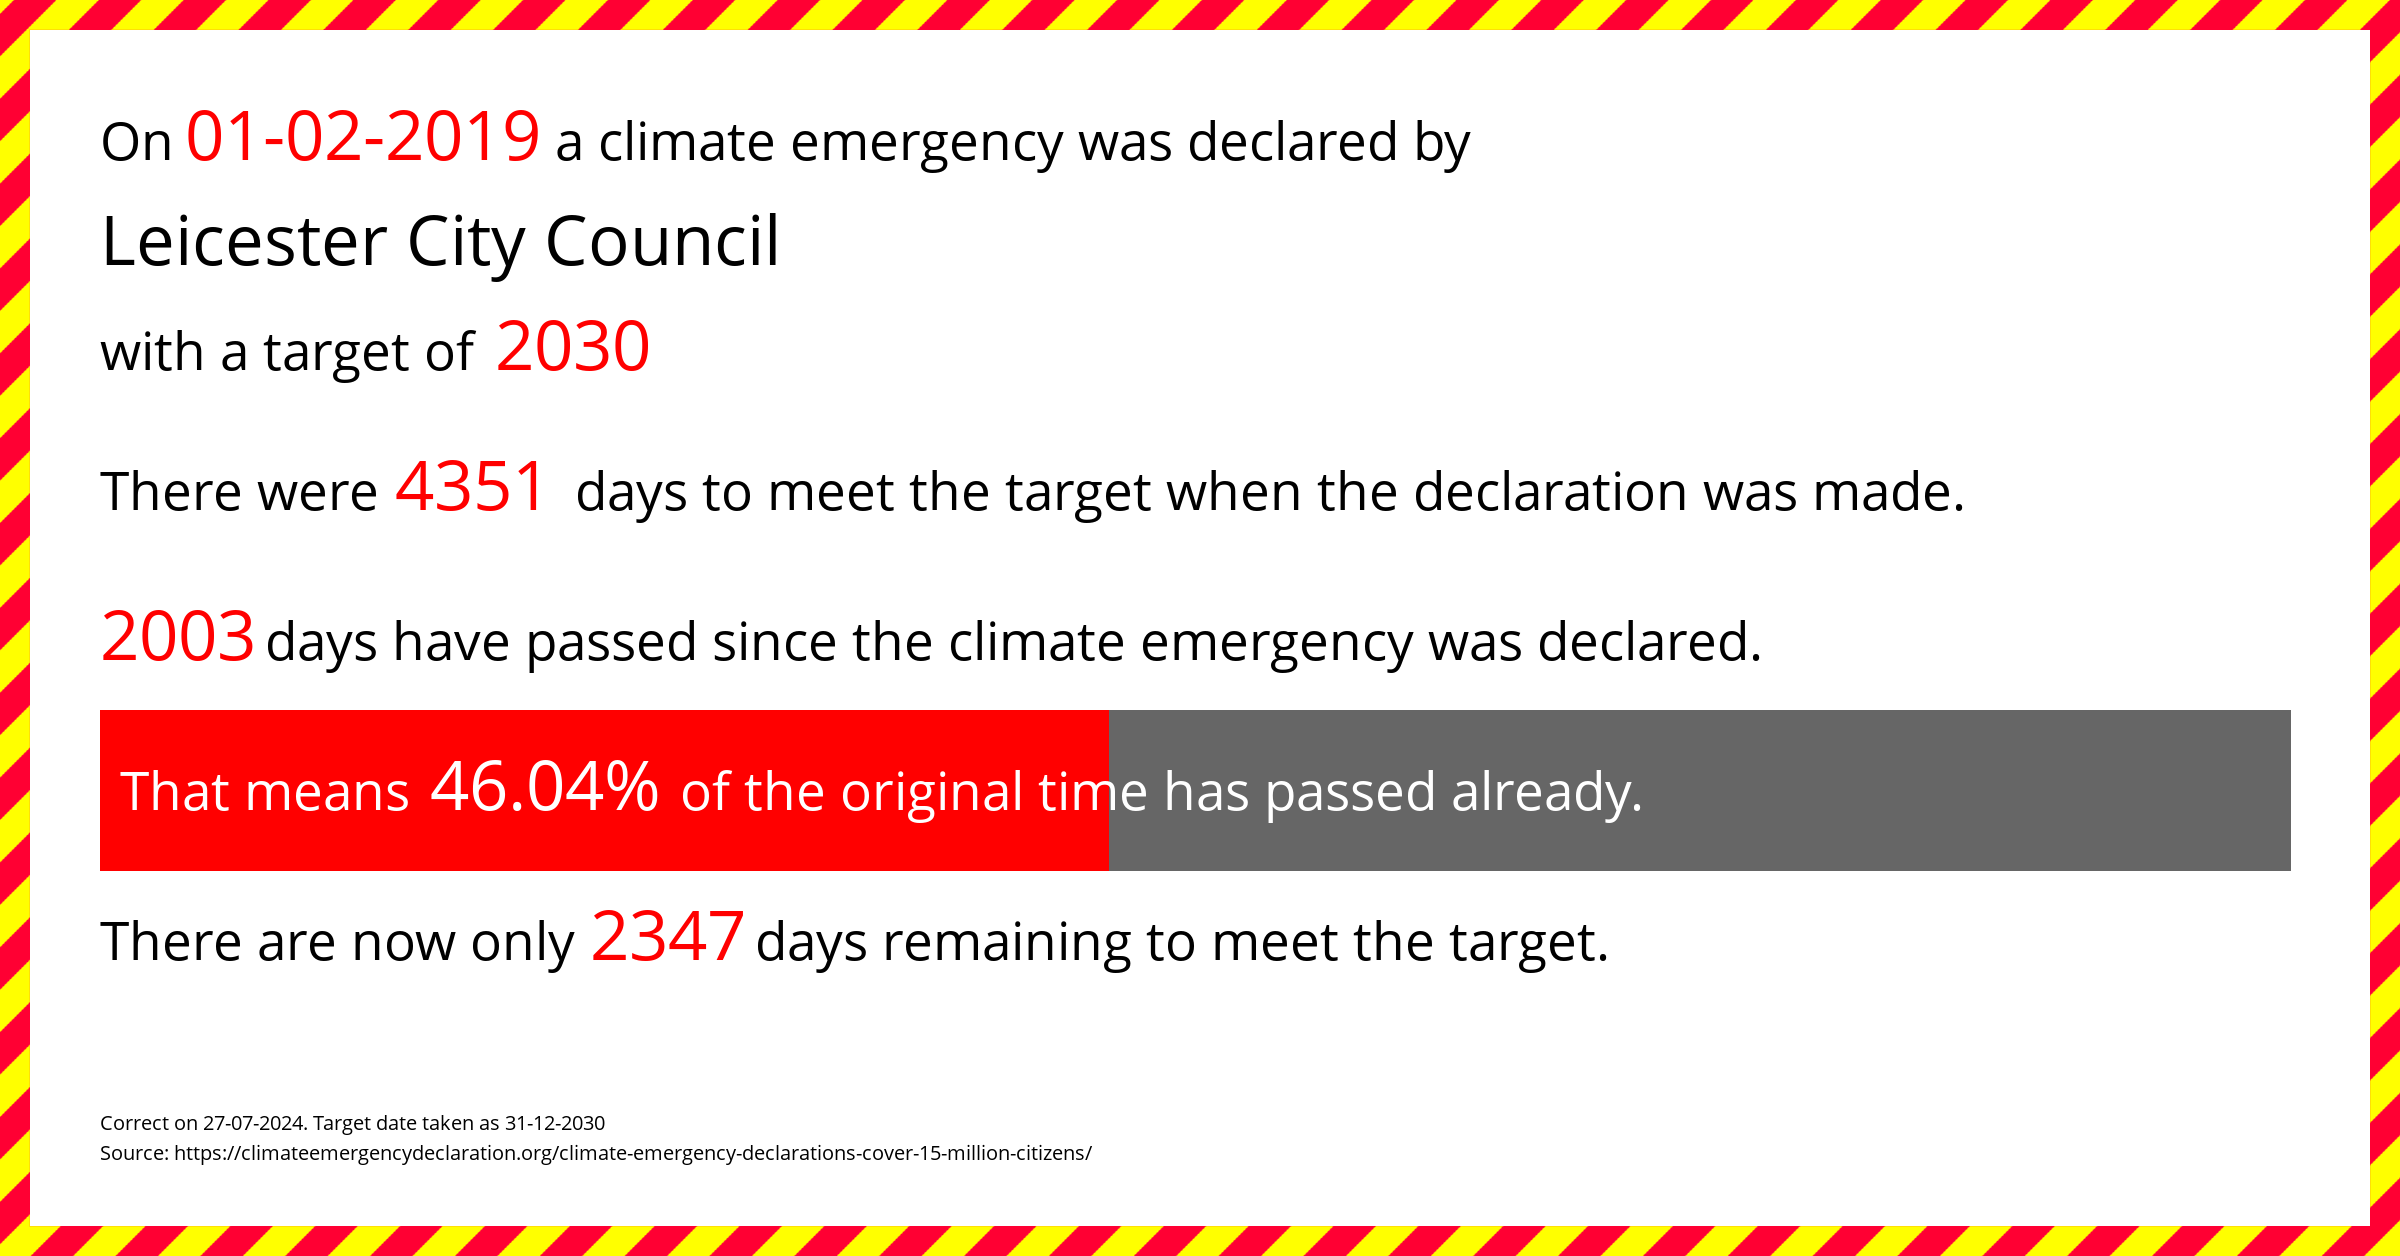 Leicester City Council declared a Climate emergency on Friday 1st February 2019, with a target of 2030.